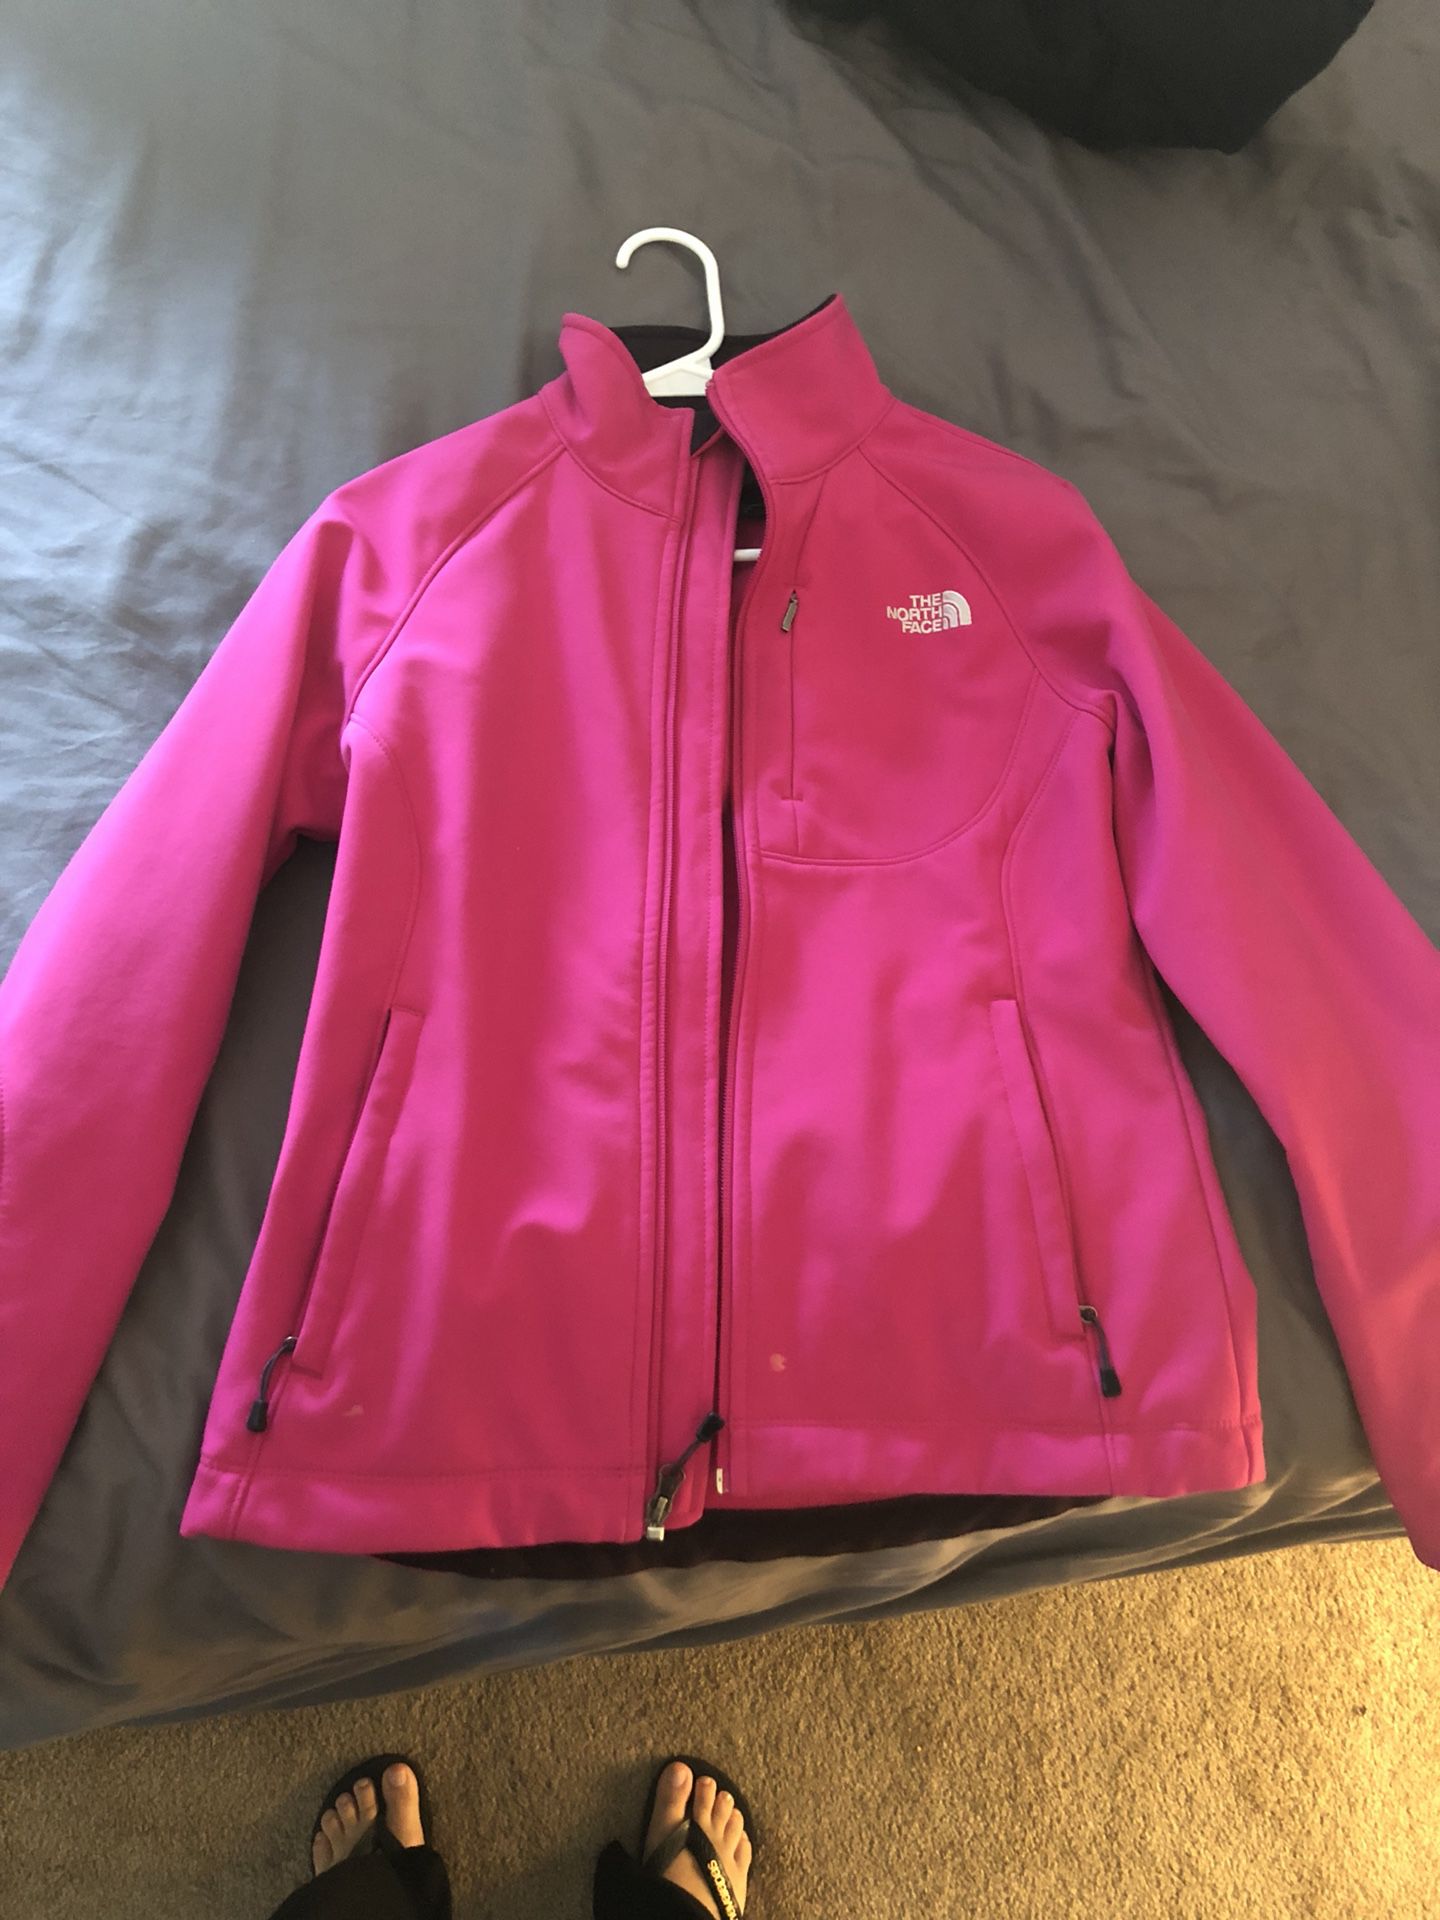 North Face women’s jacket